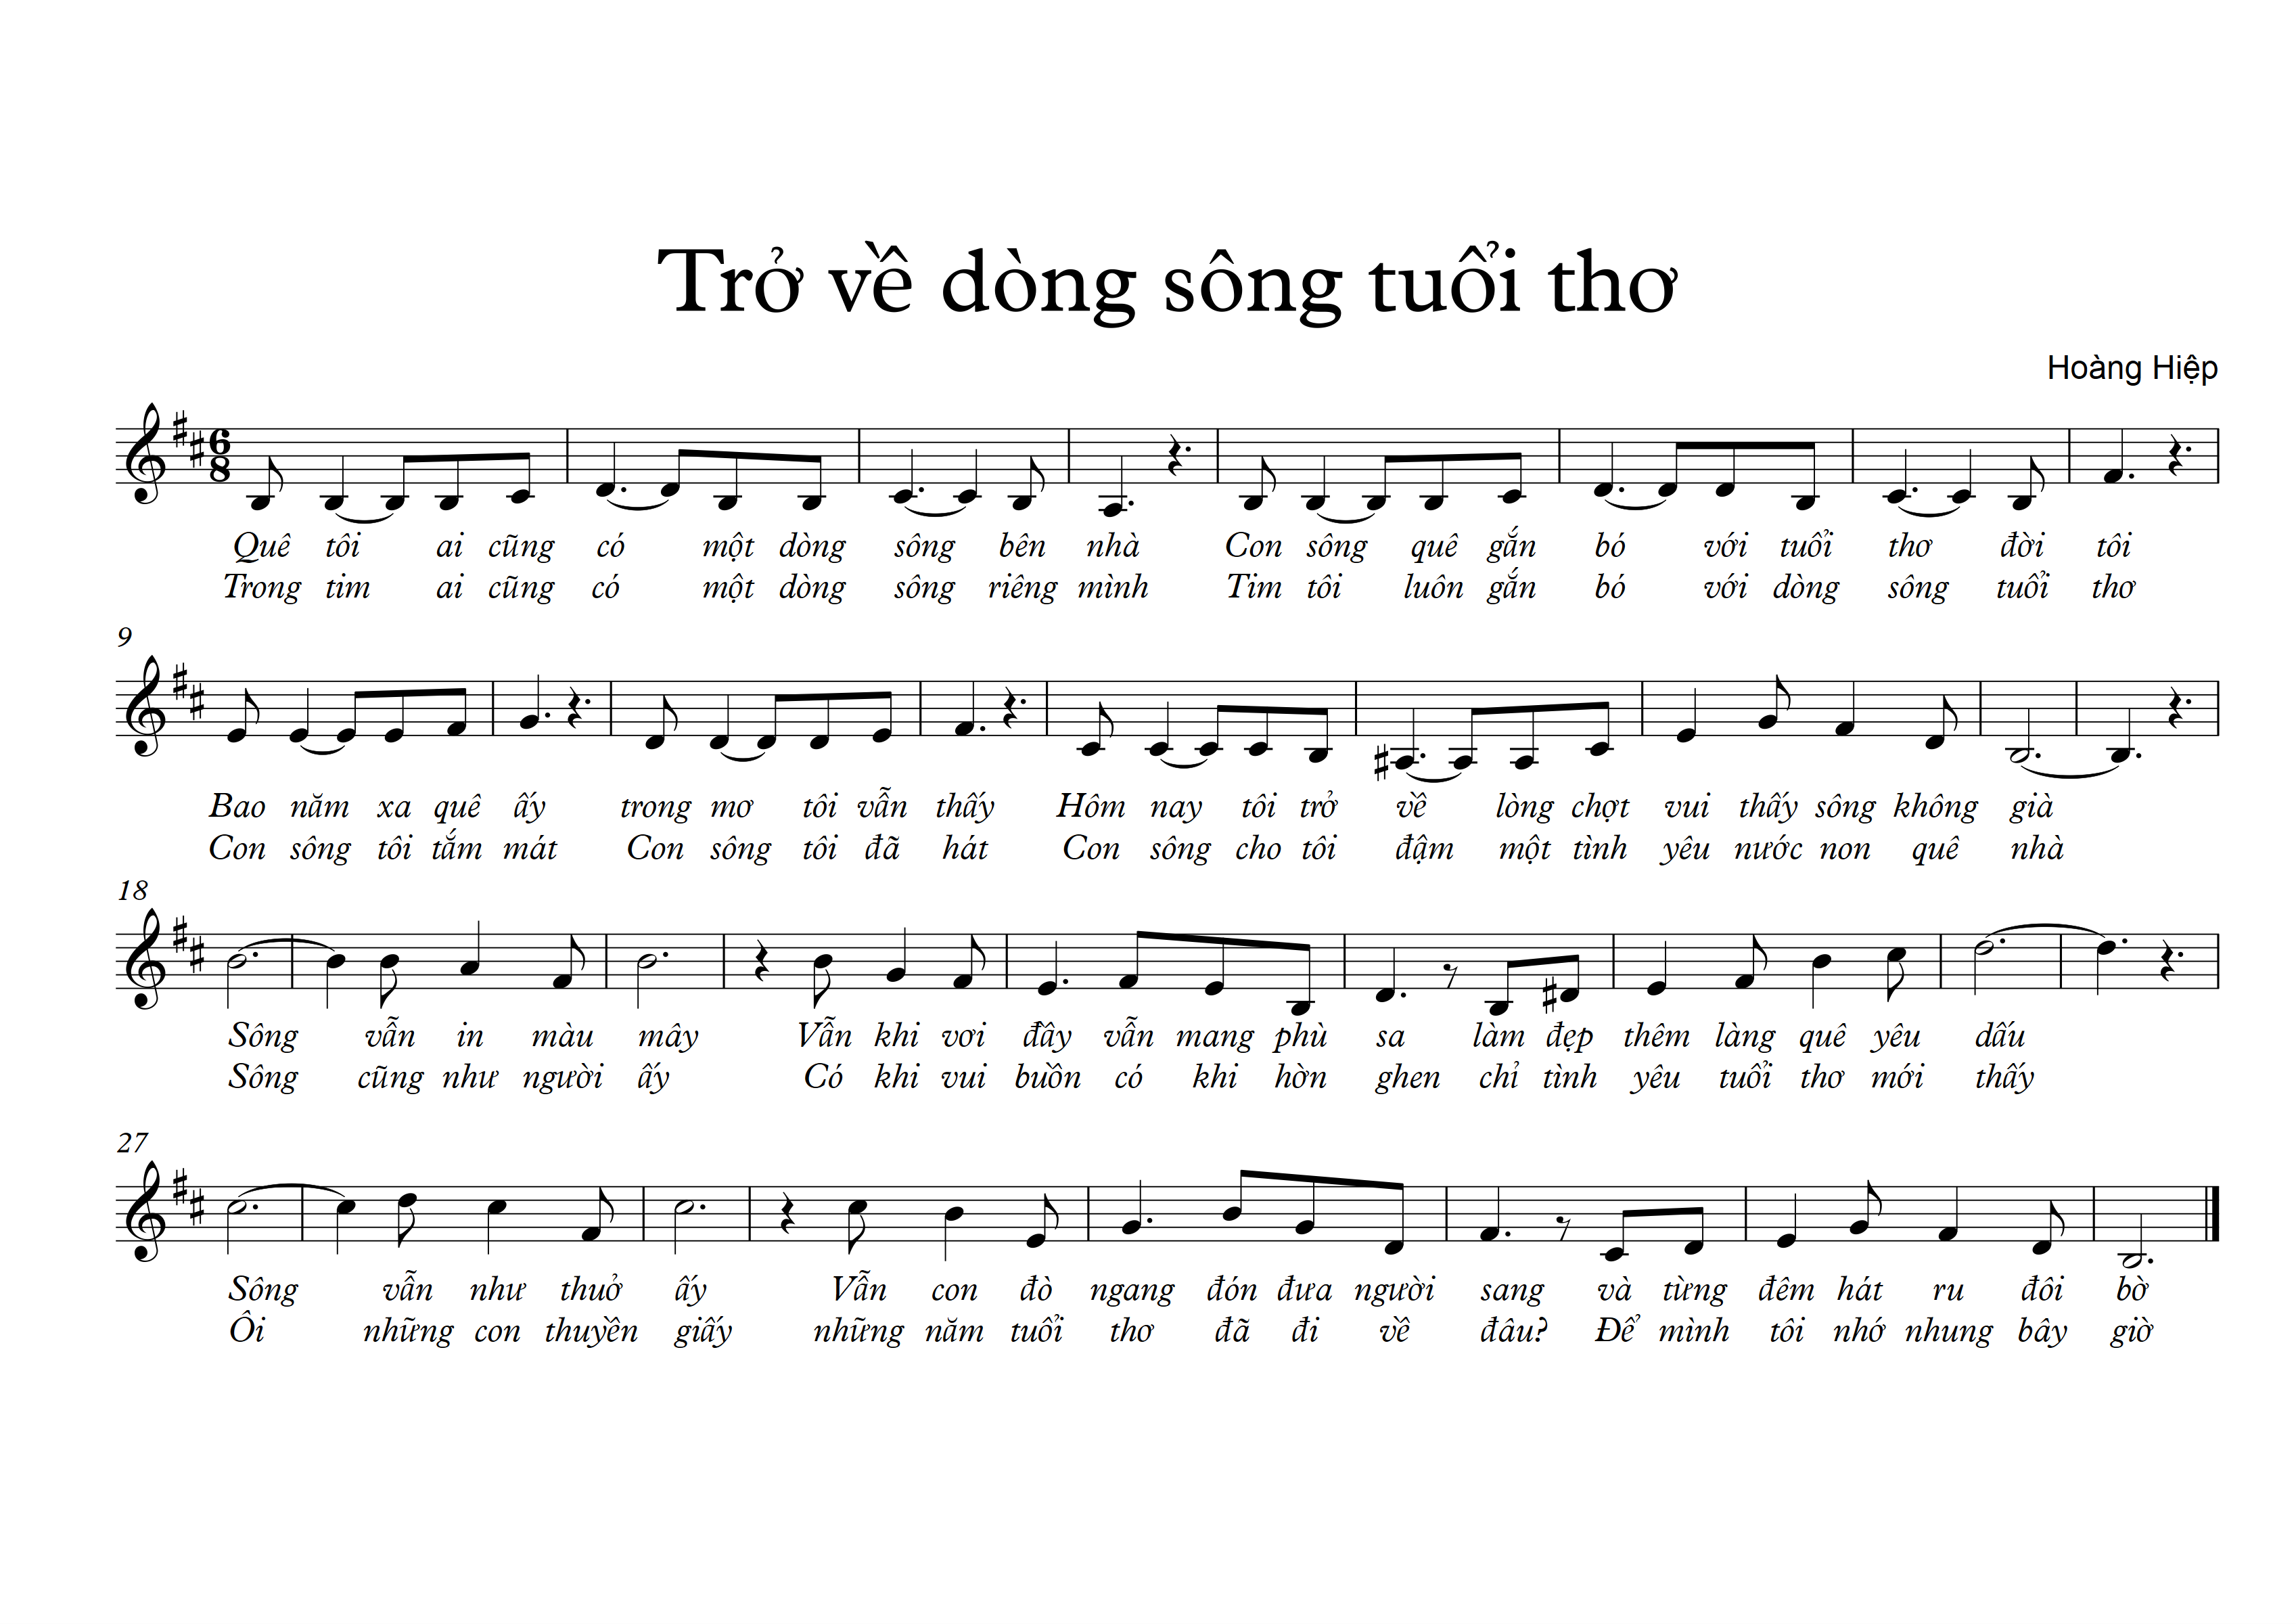 Tro ve dong song tuoi tho